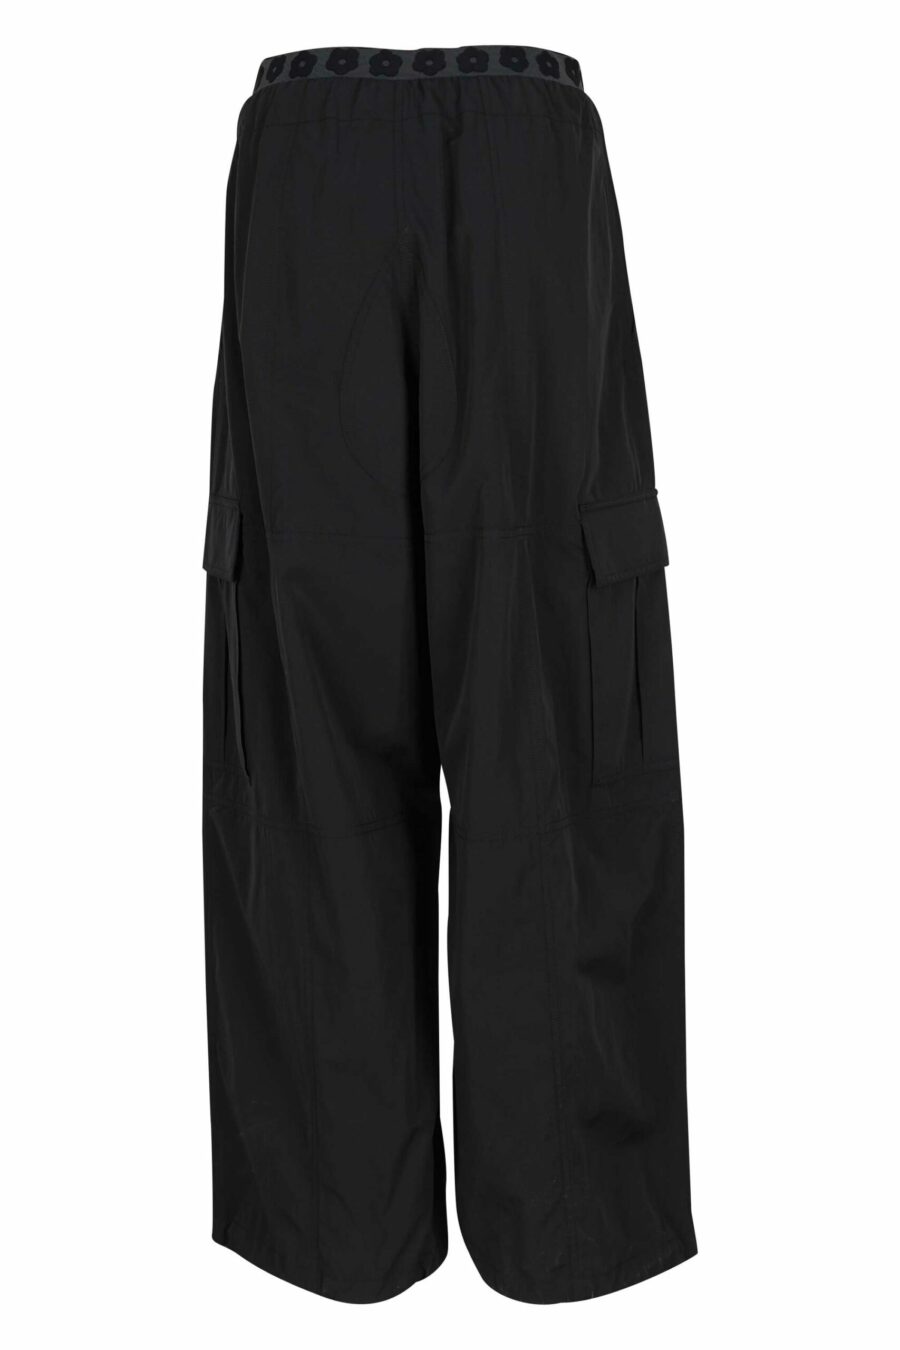 Black cargo trousers with "boke flower" logo - 3612230658301 2 scaled